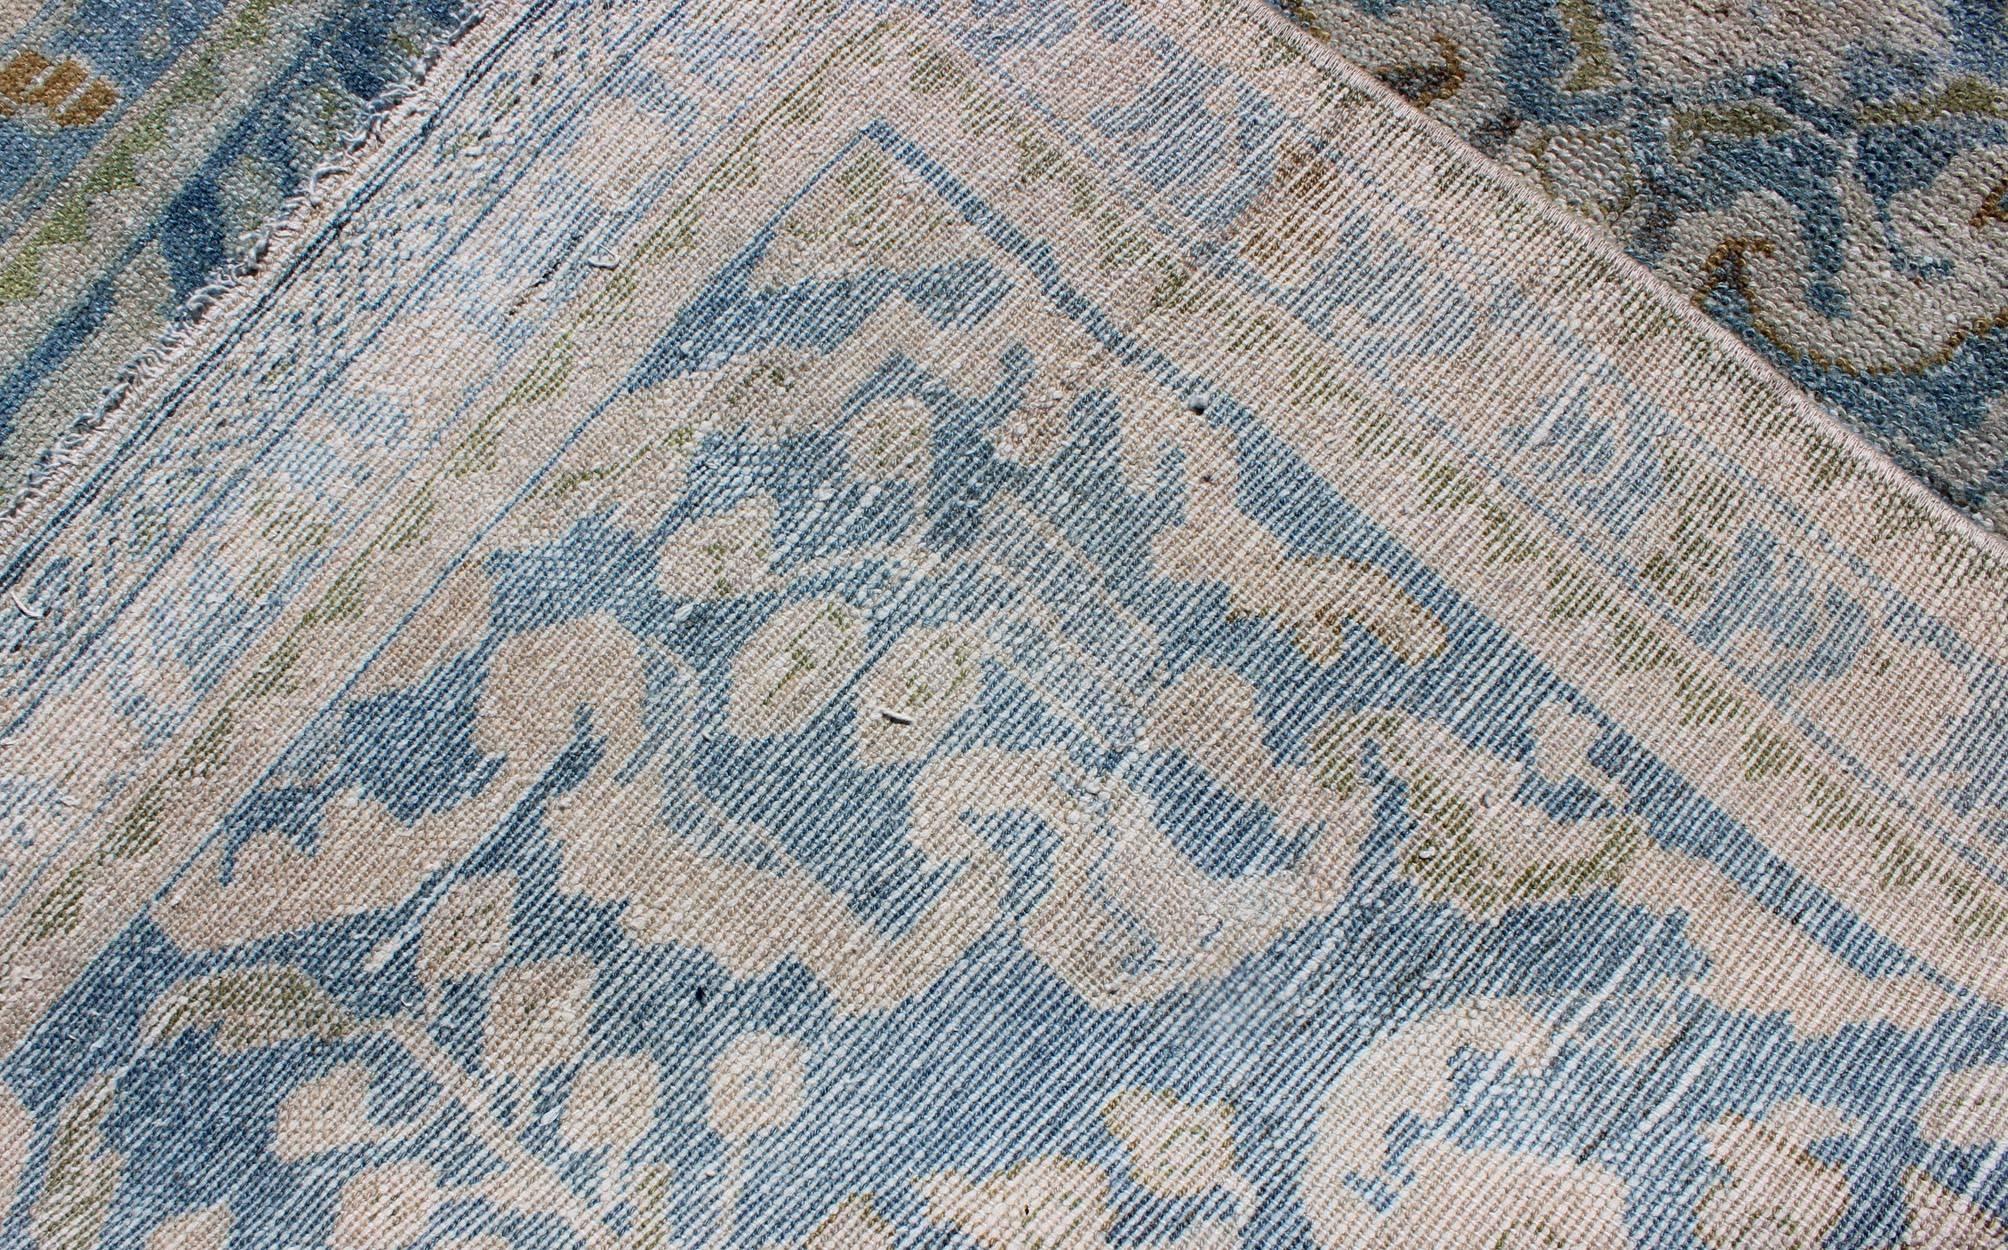 Antique Persian Malayer Runner with All-Over Design in Blue and Hints of Olive 1